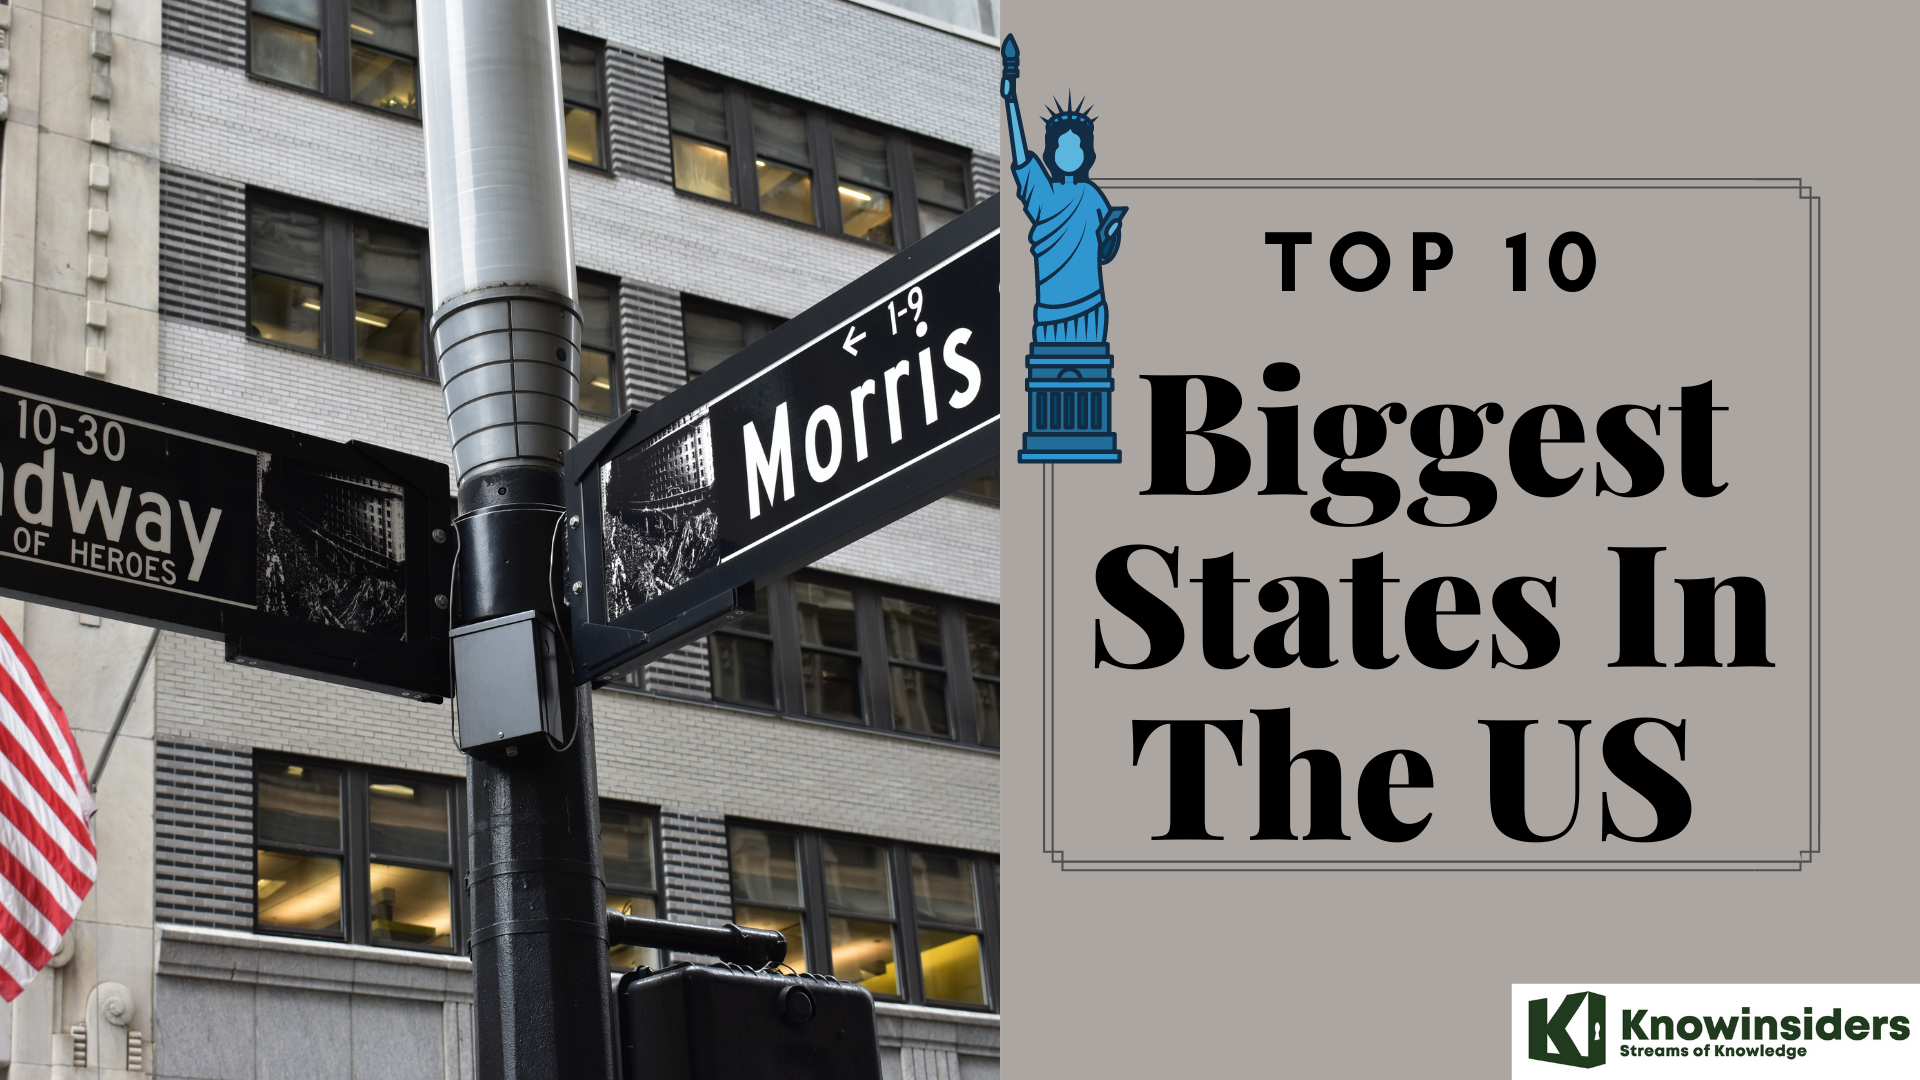 Top 10 Biggest States In The United States - By Population